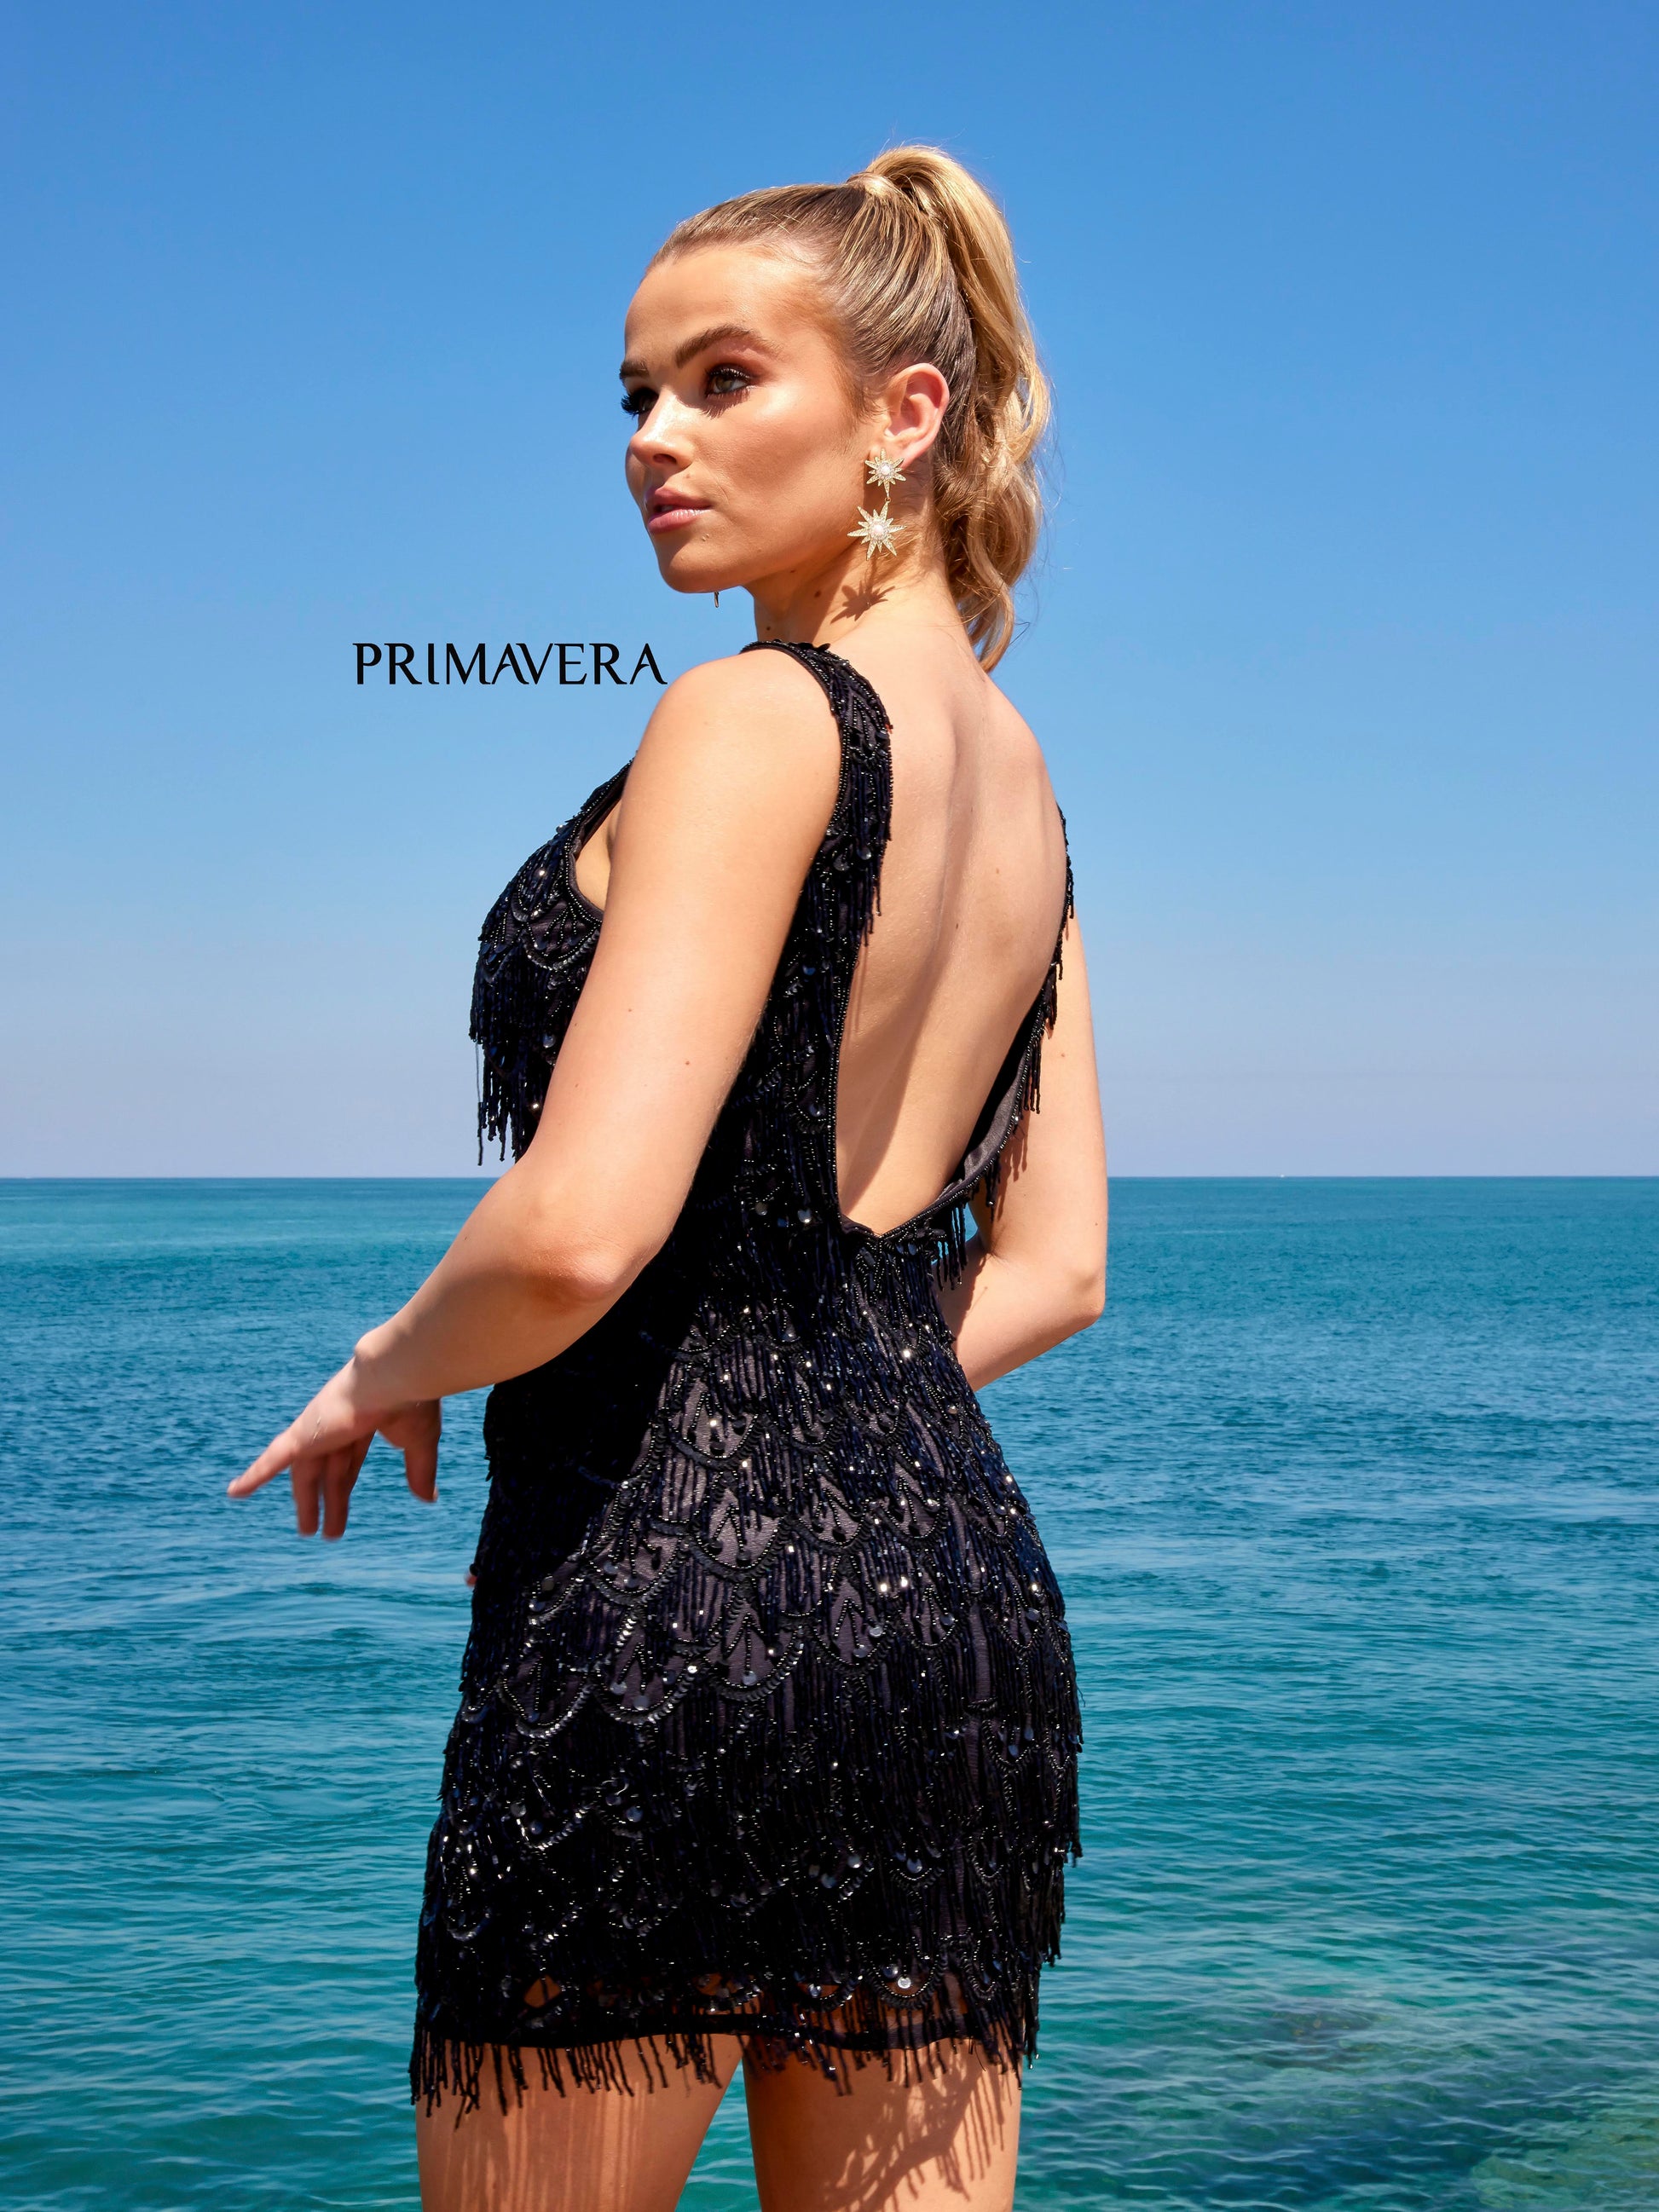 Primavera Couture 4042 Beaded Embellished Fringe With Stones V-Neck Cocktail Homecoming Dress. This Primavera Couture dress is sure to make a statement. A V-neck style adorned with beaded fringe, stones, and embellishments creates a unique and polished look with modern appeal. Perfect for a special occasion.